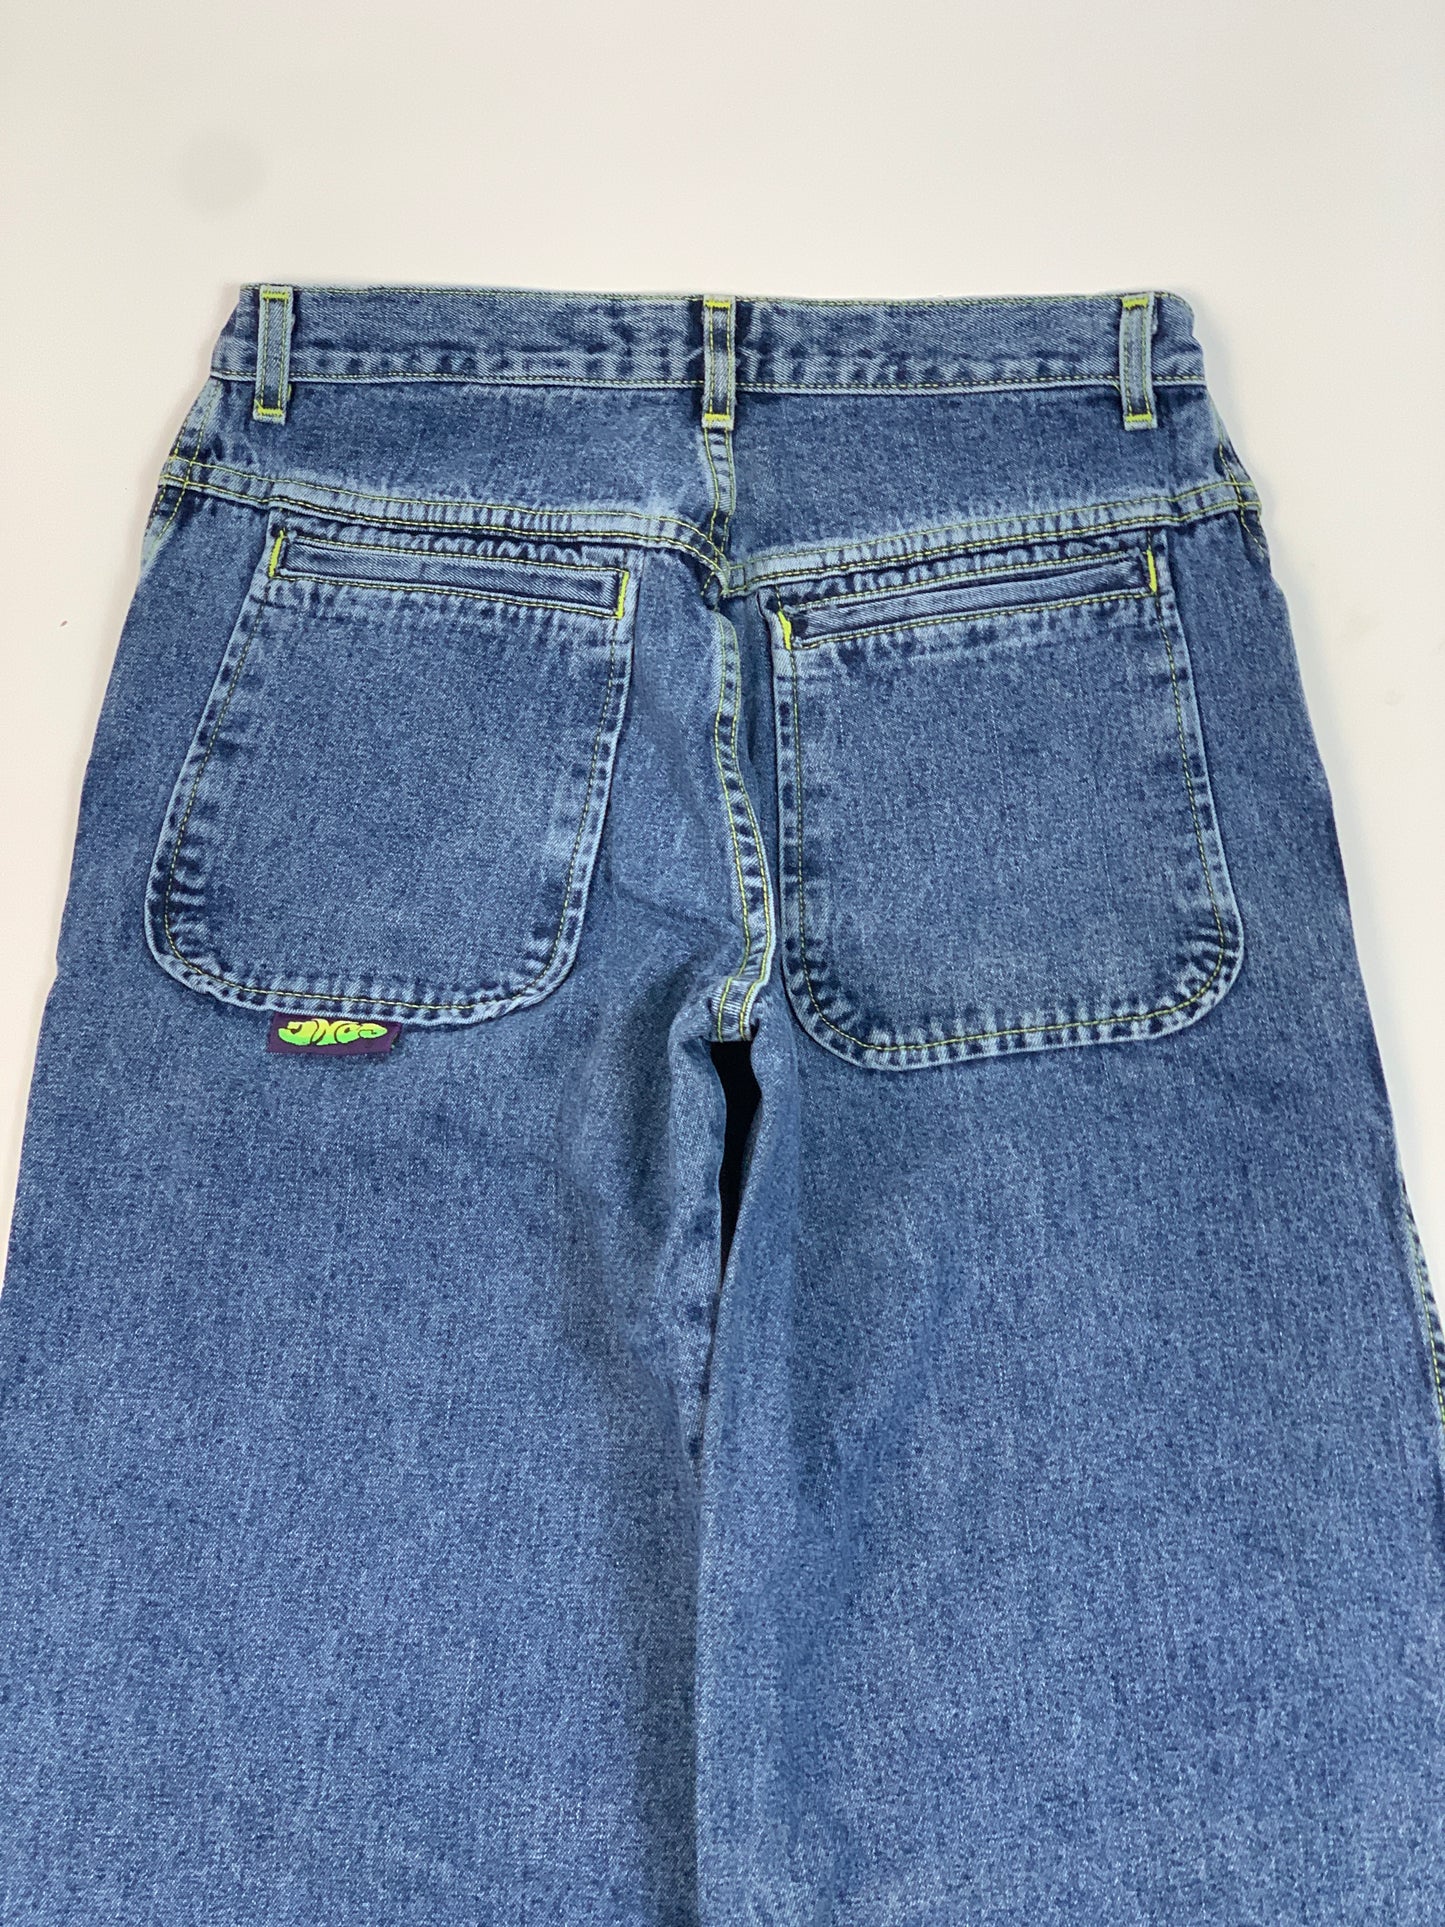 JNCO 20'' Rewind Vintage Baggy Girl Embroidery Wide Jeans - 9